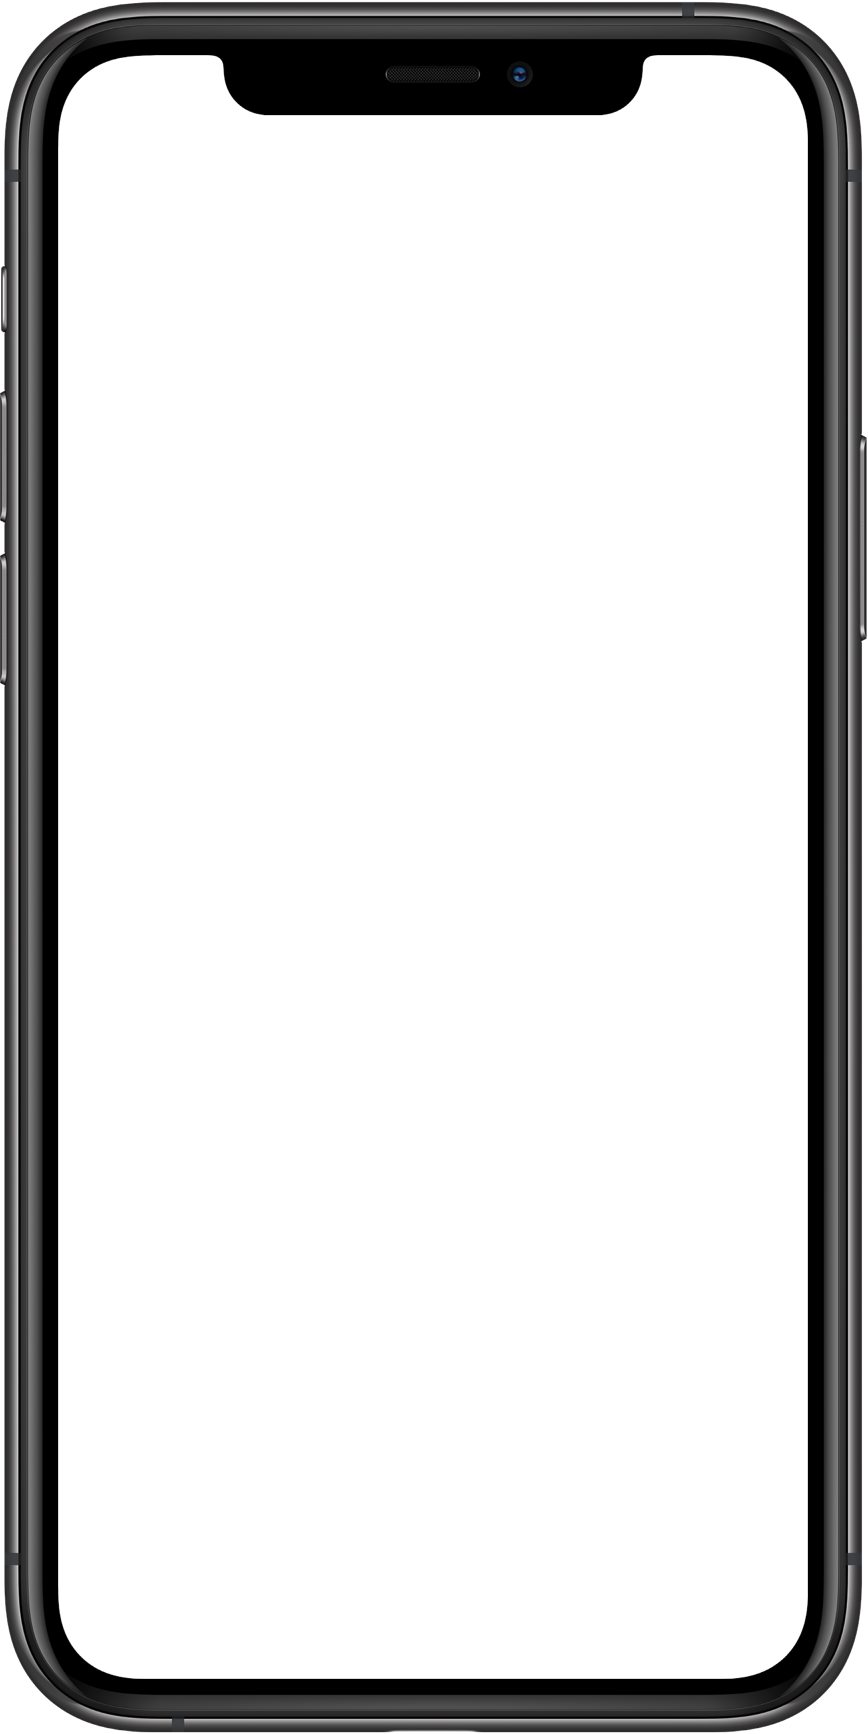 iPhone device frame